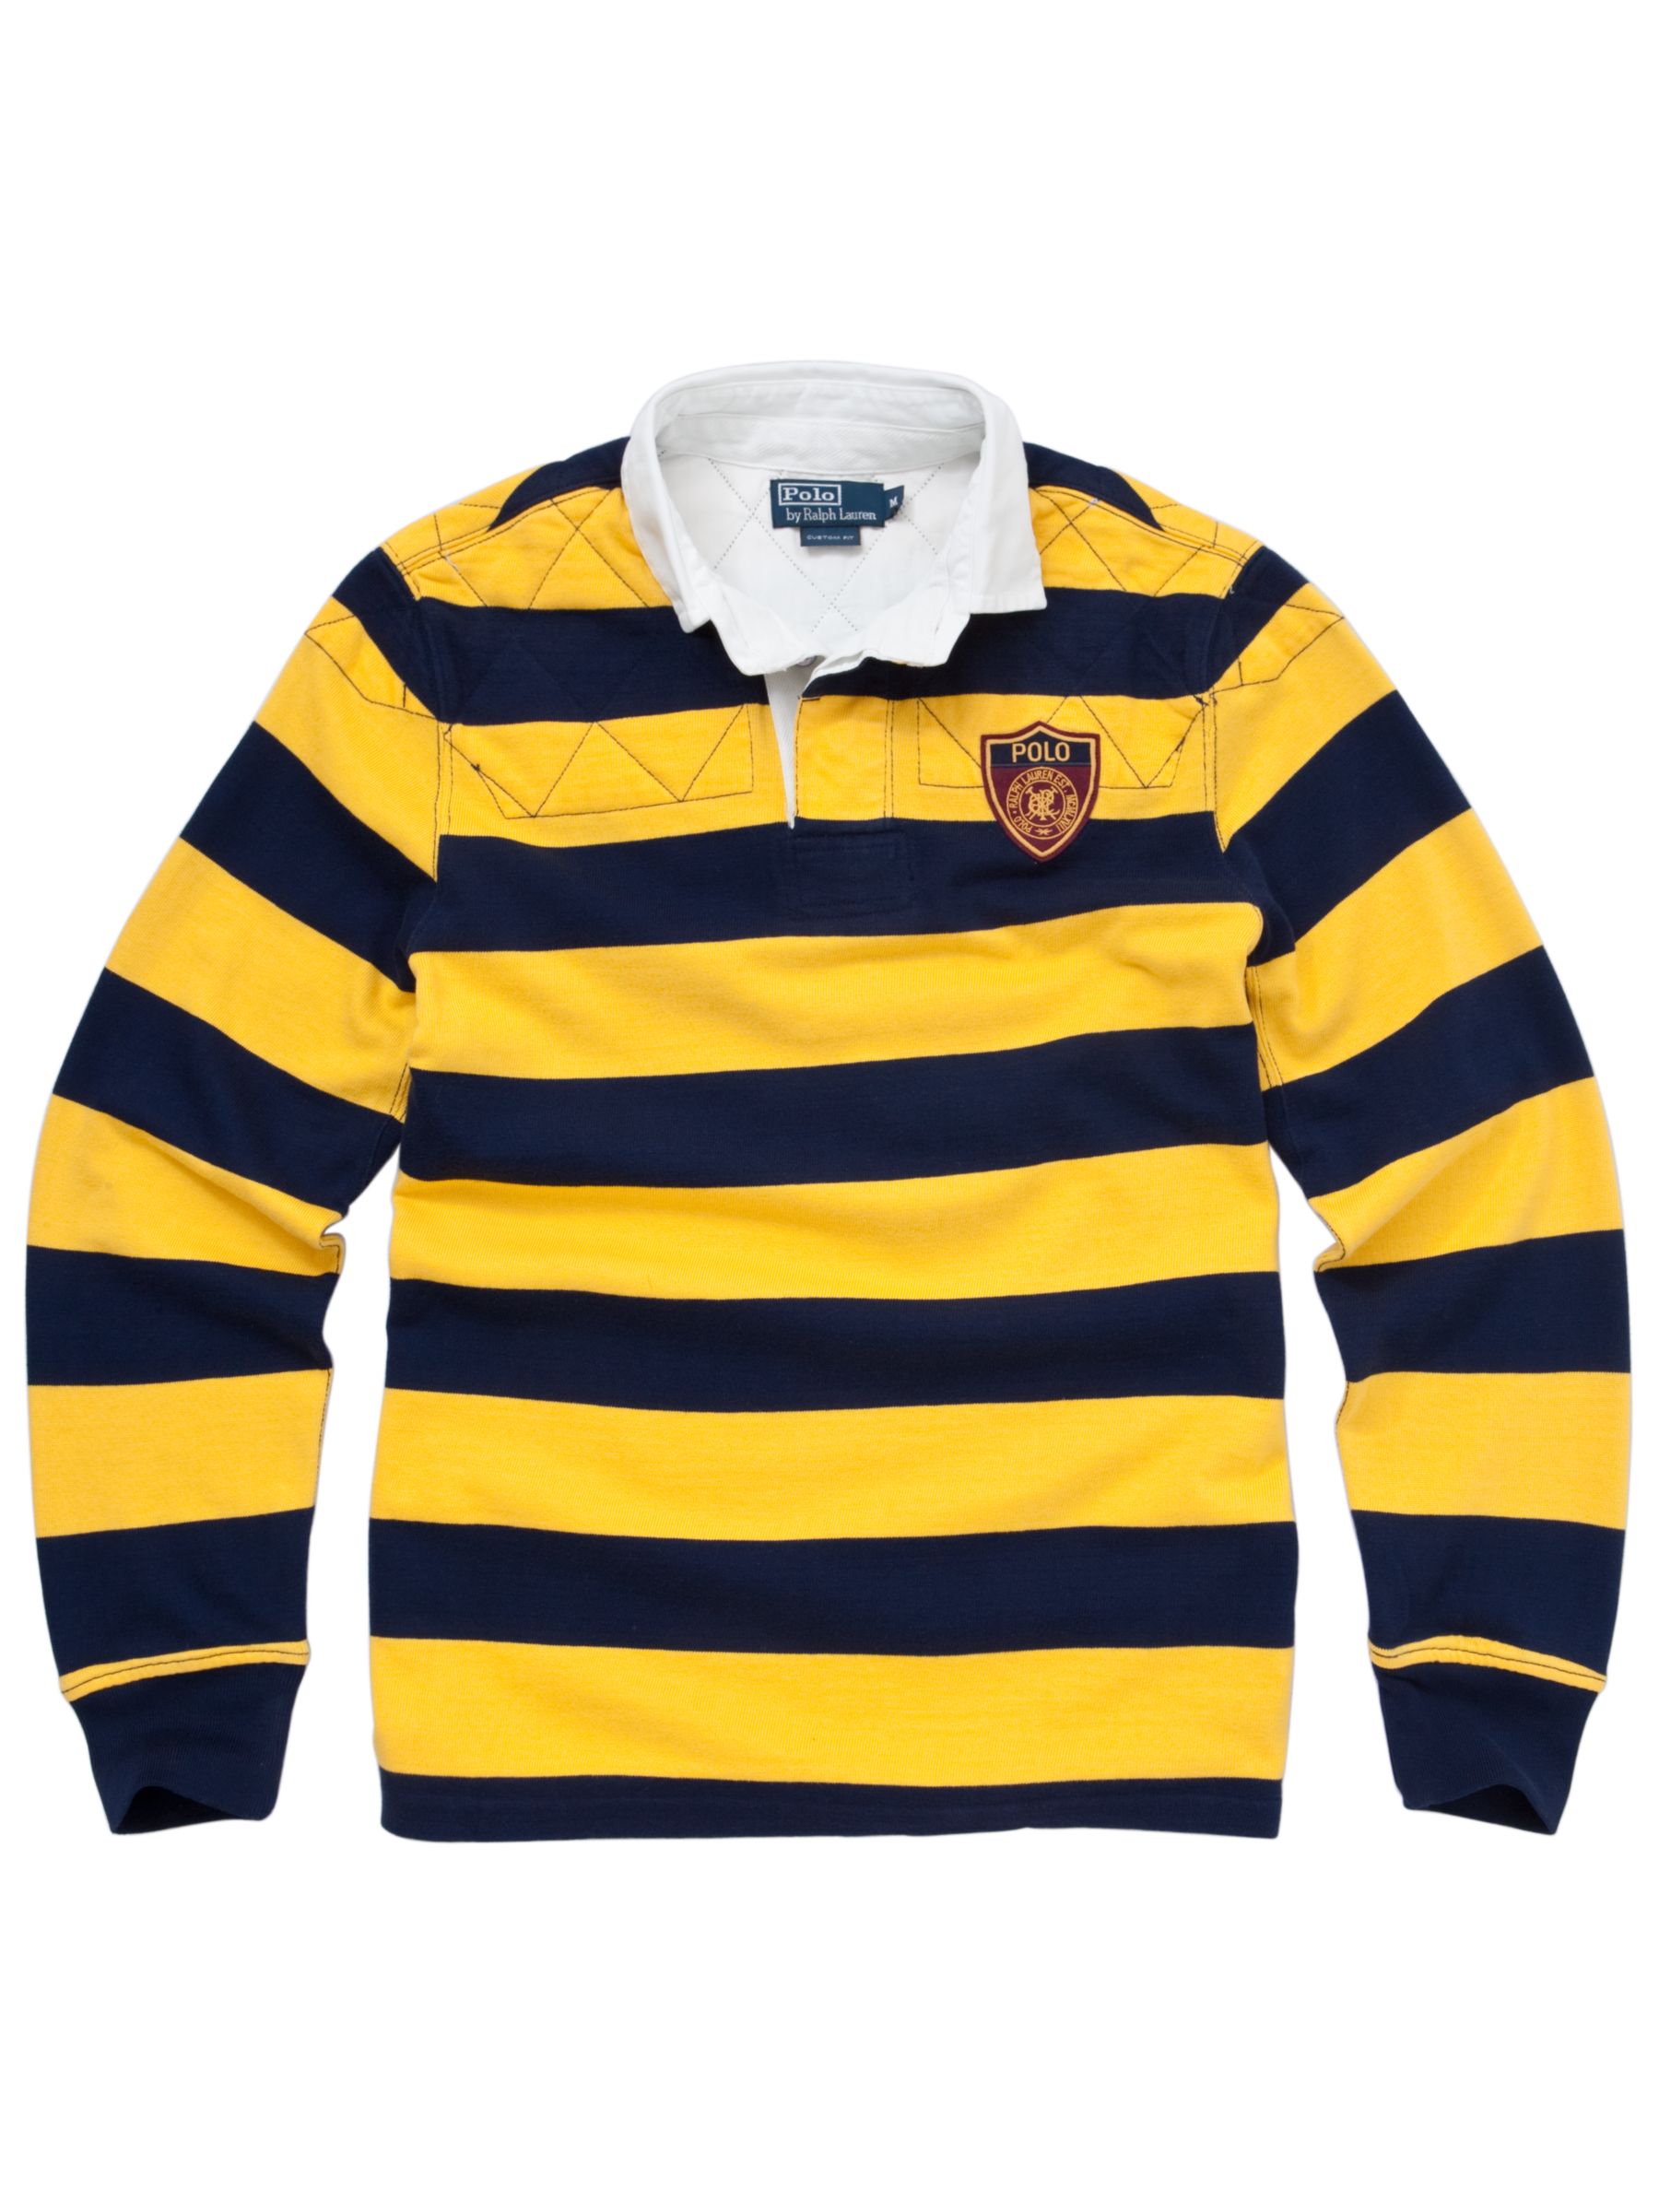 polo ralph lauren rugby shirts